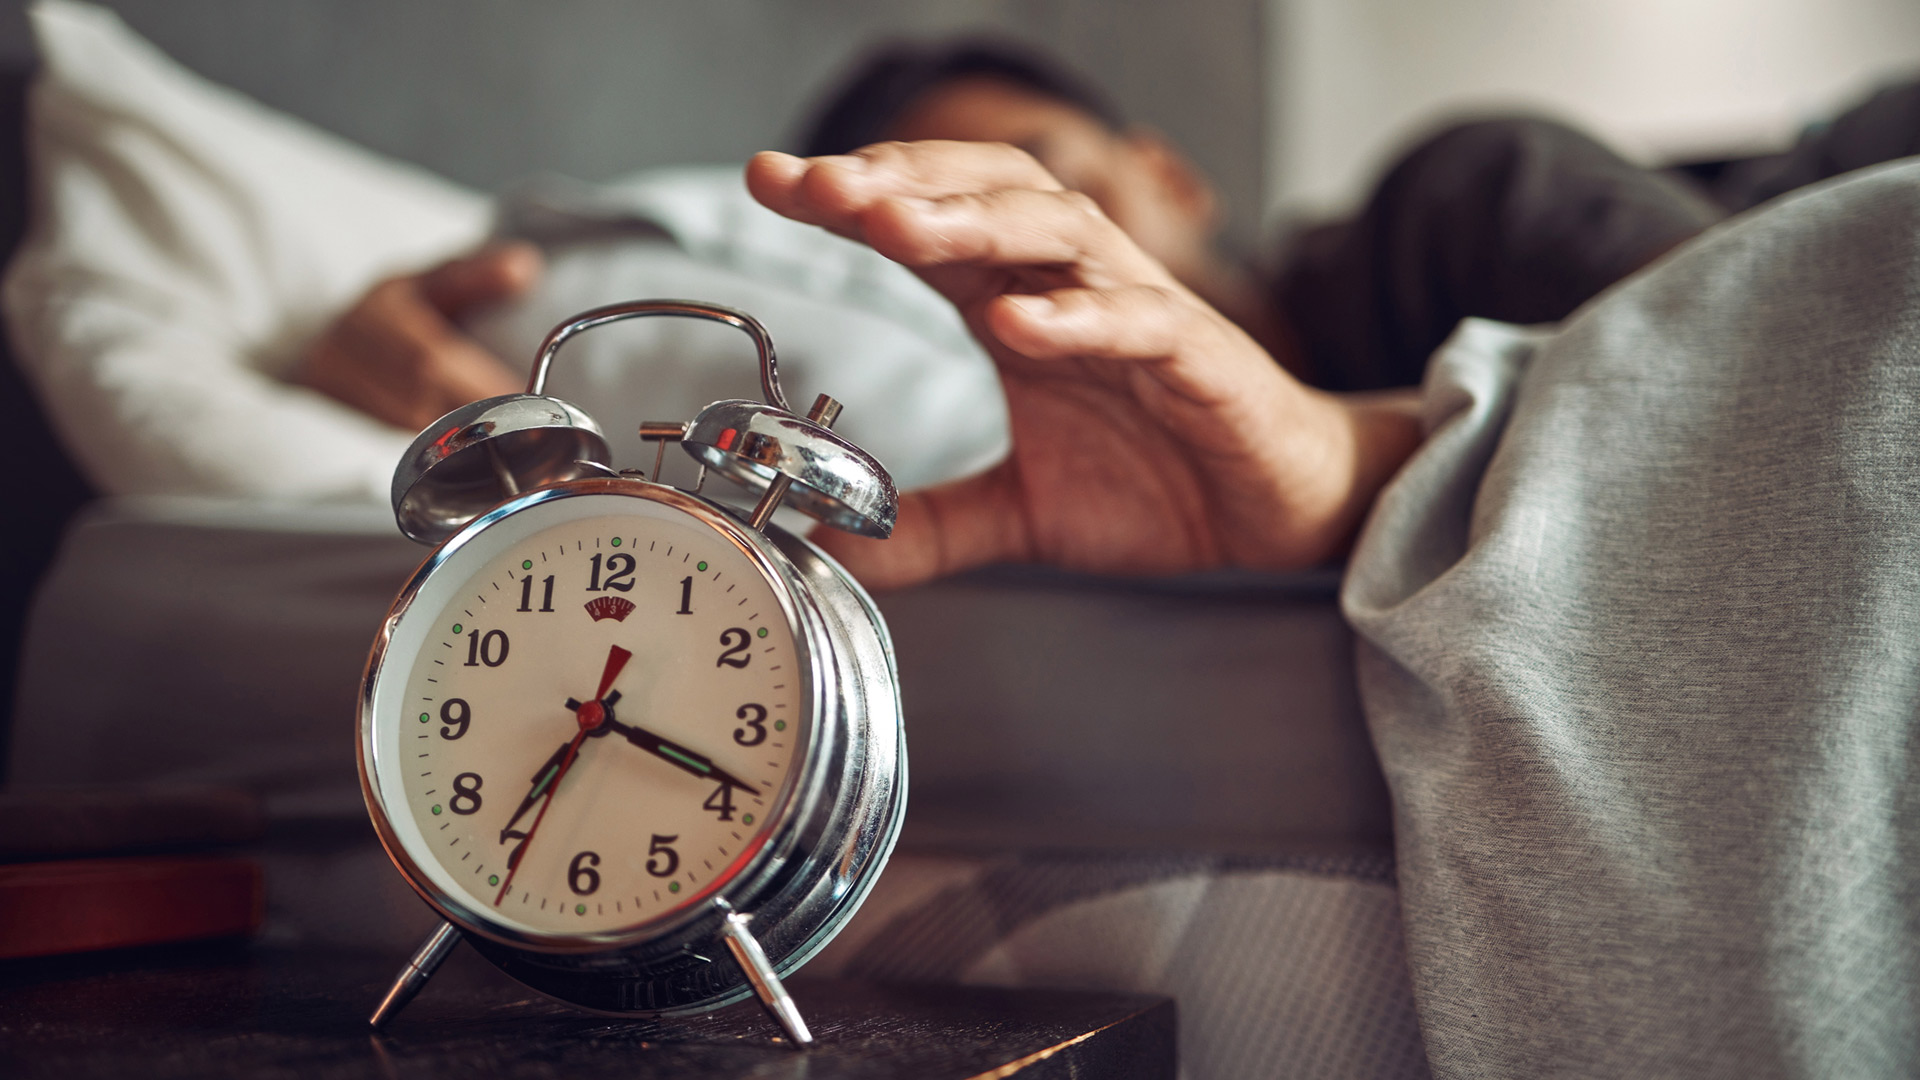 A person wakes up in the morning and reaches for the alarm clock